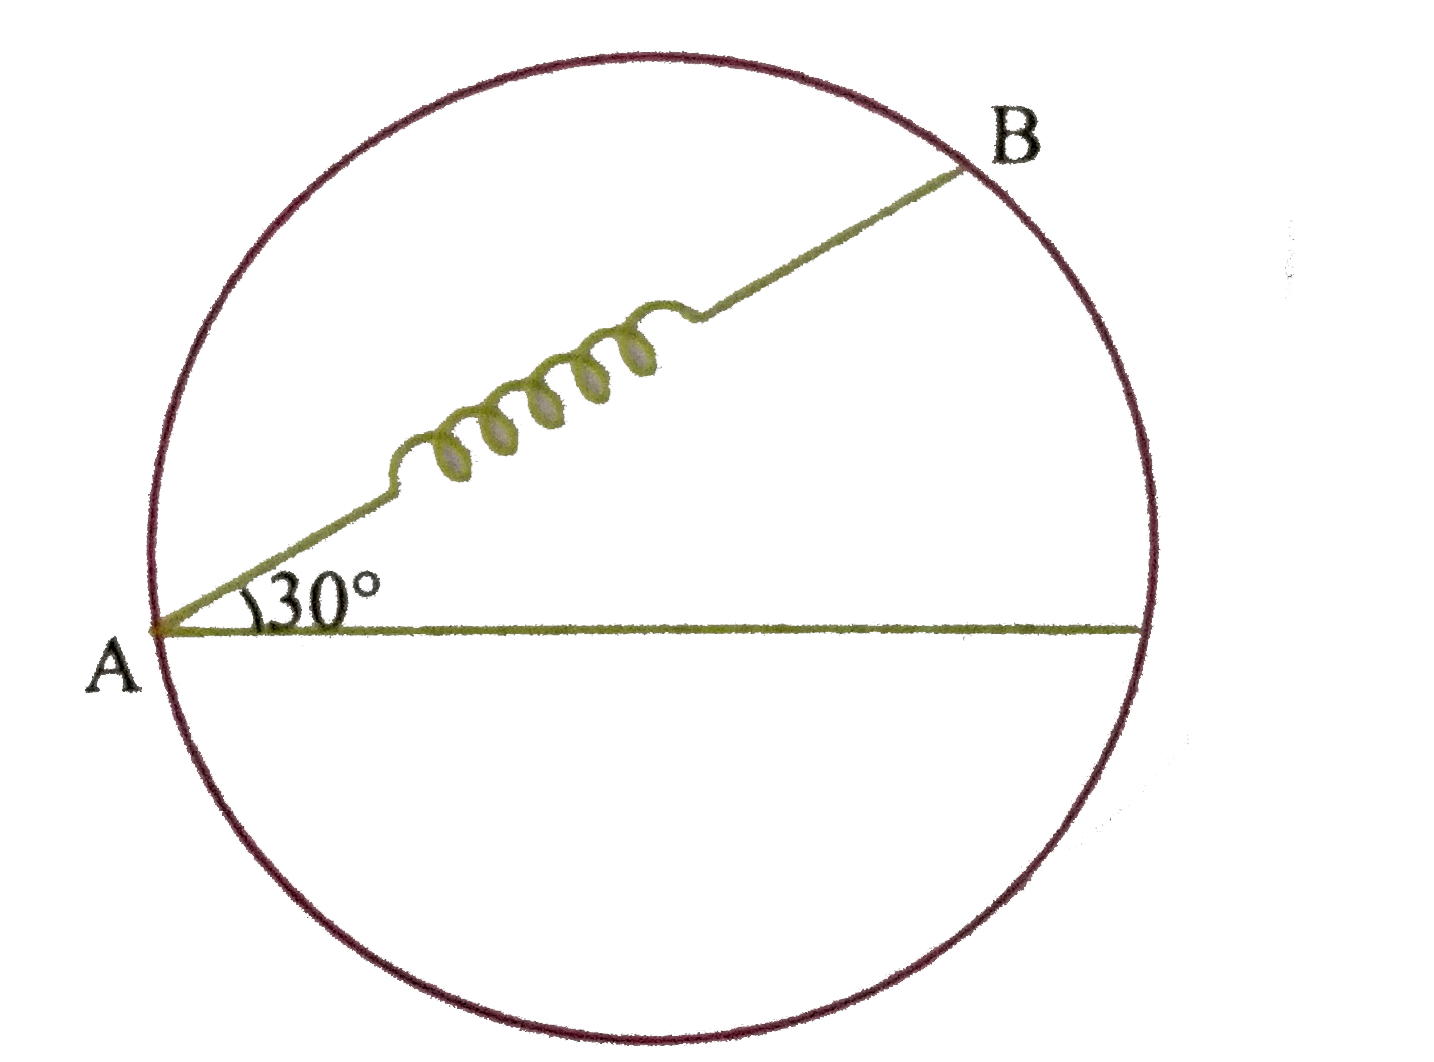 A Bead of mass m is attached to one end of a spring of natural length 'R' and spring cosntant 'k=((sqrt3+1)mg)/R'. The other end of the spring is fixed at point 'A' on a smooth vertical ring of radius 'R' as shown